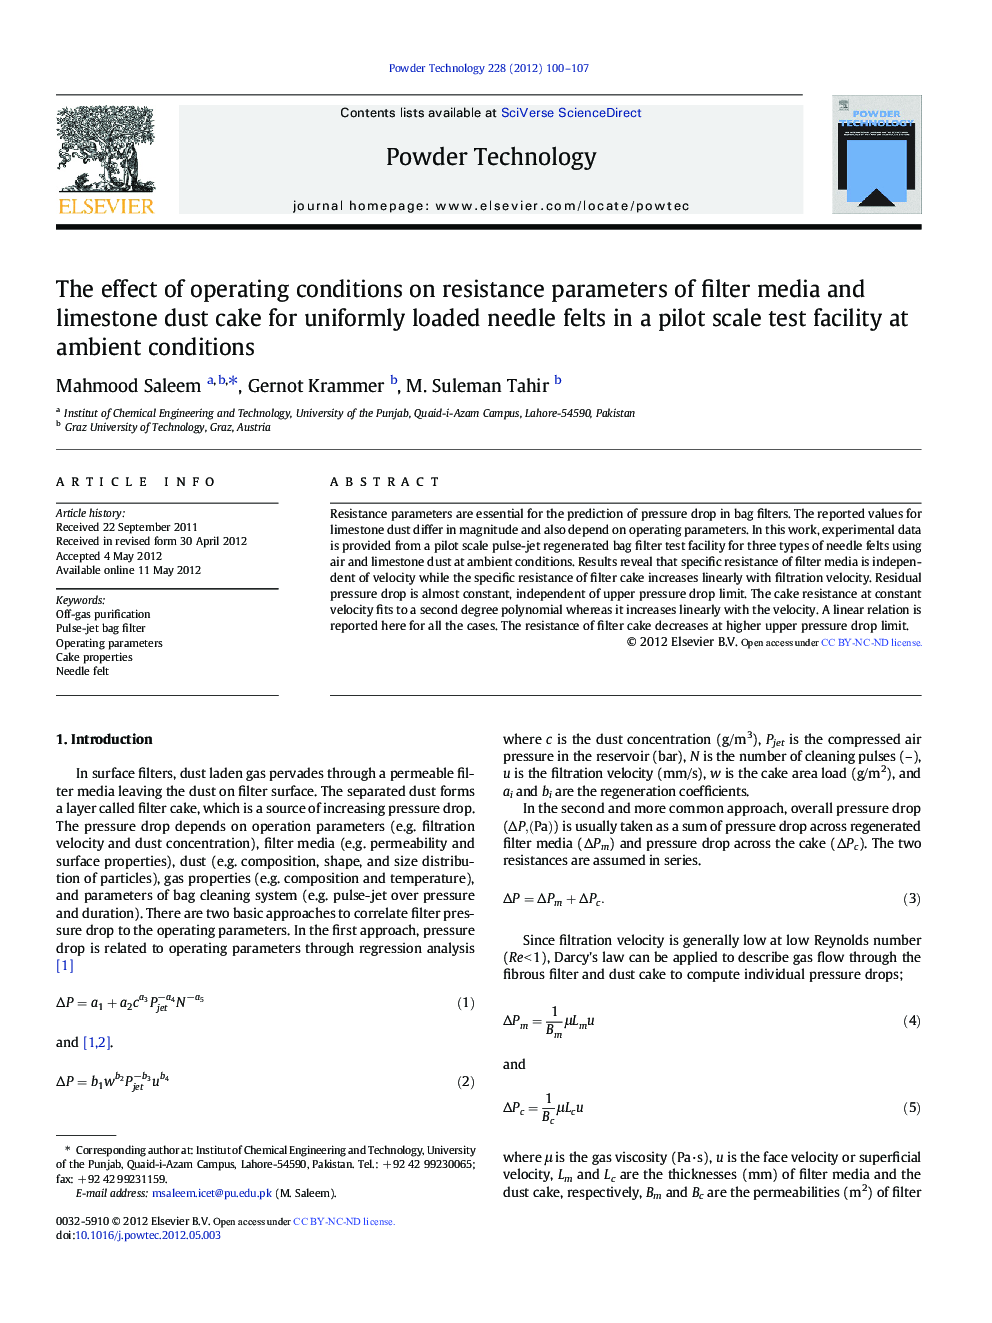 The effect of operating conditions on resistance parameters of filter media and limestone dust cake for uniformly loaded needle felts in a pilot scale test facility at ambient conditions